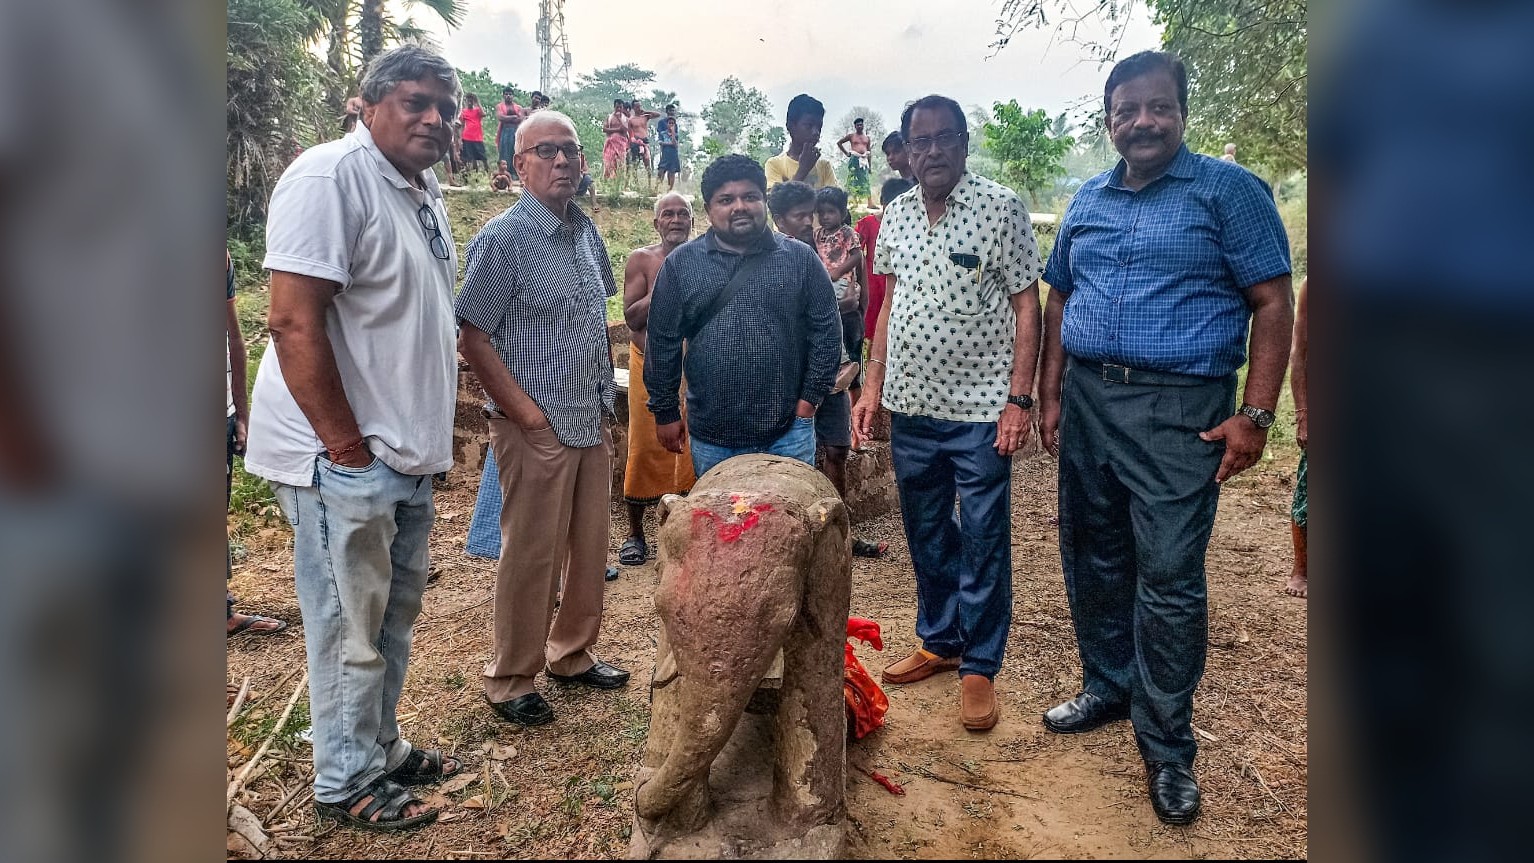 A team of 5 men stand around the elephant statue in the field.